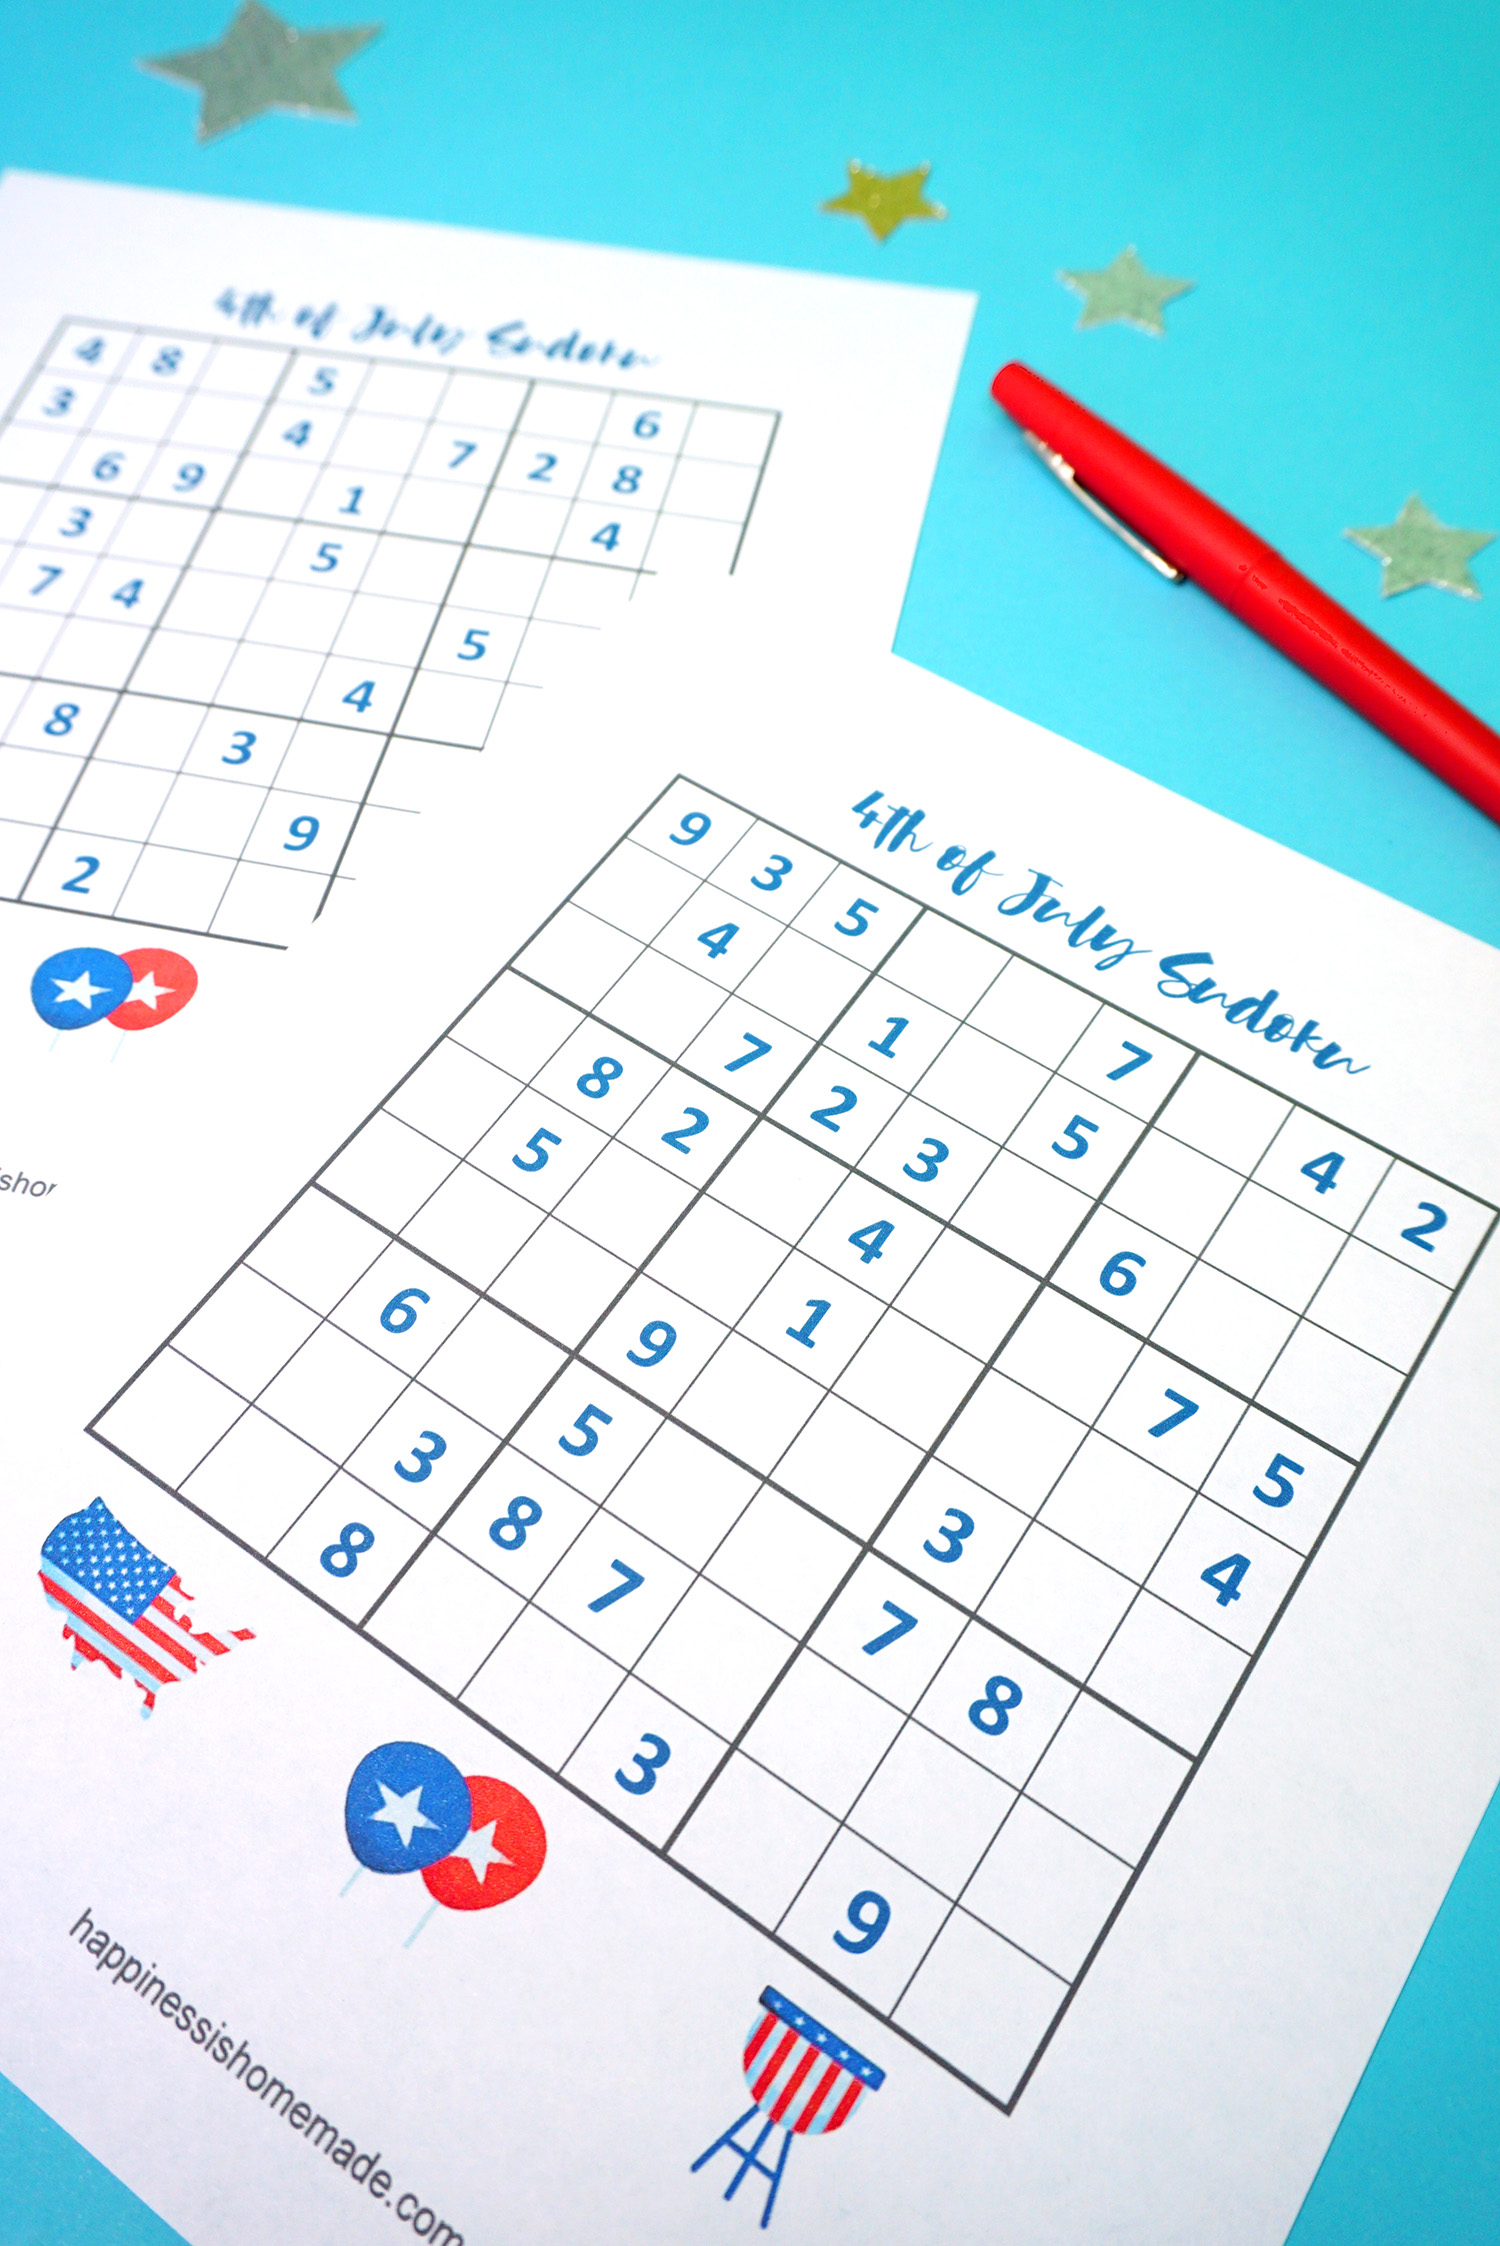 4Th Of July Printable Sudoku Puzzles + Logic Puzzle - Happiness Is - Free Printable Sudoku Puzzles